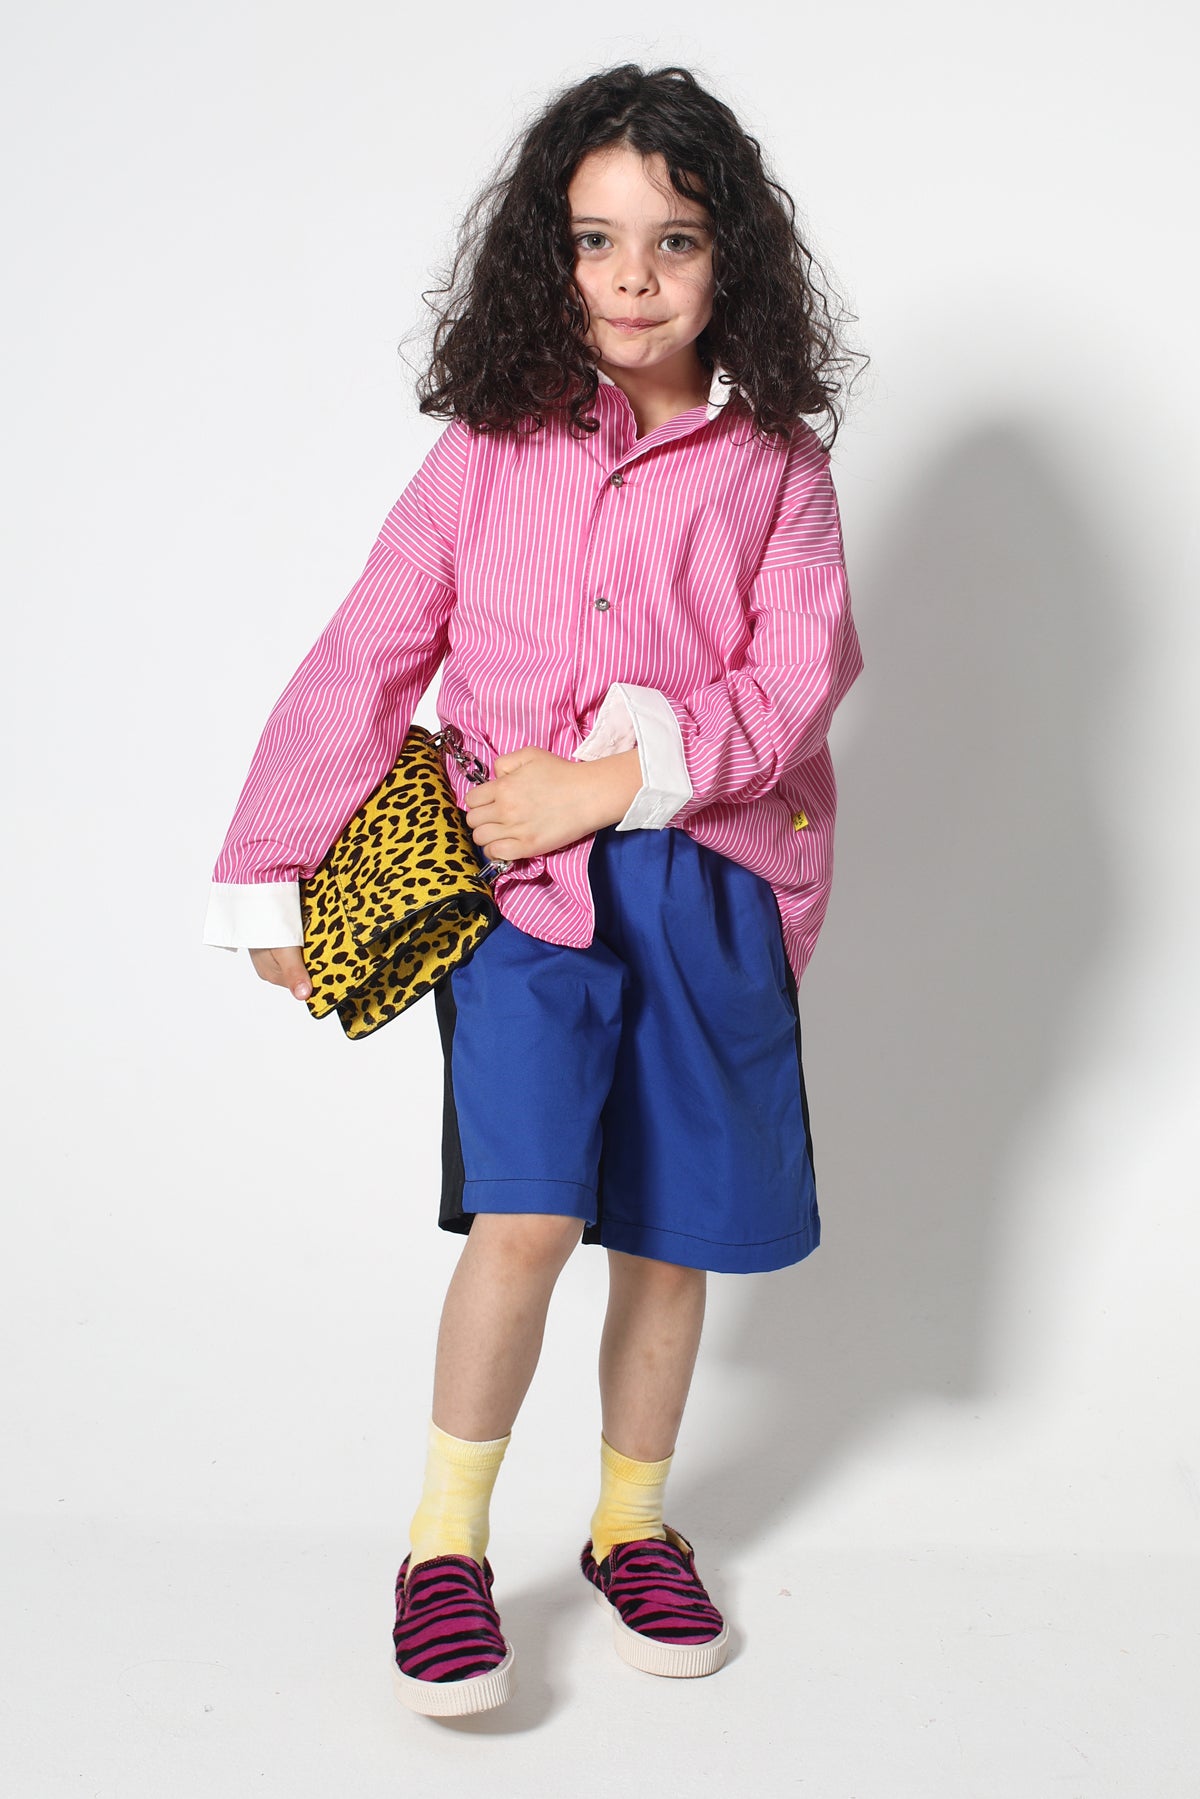 PINK AND WHITE STRIPED LOOSE SHIRT makids